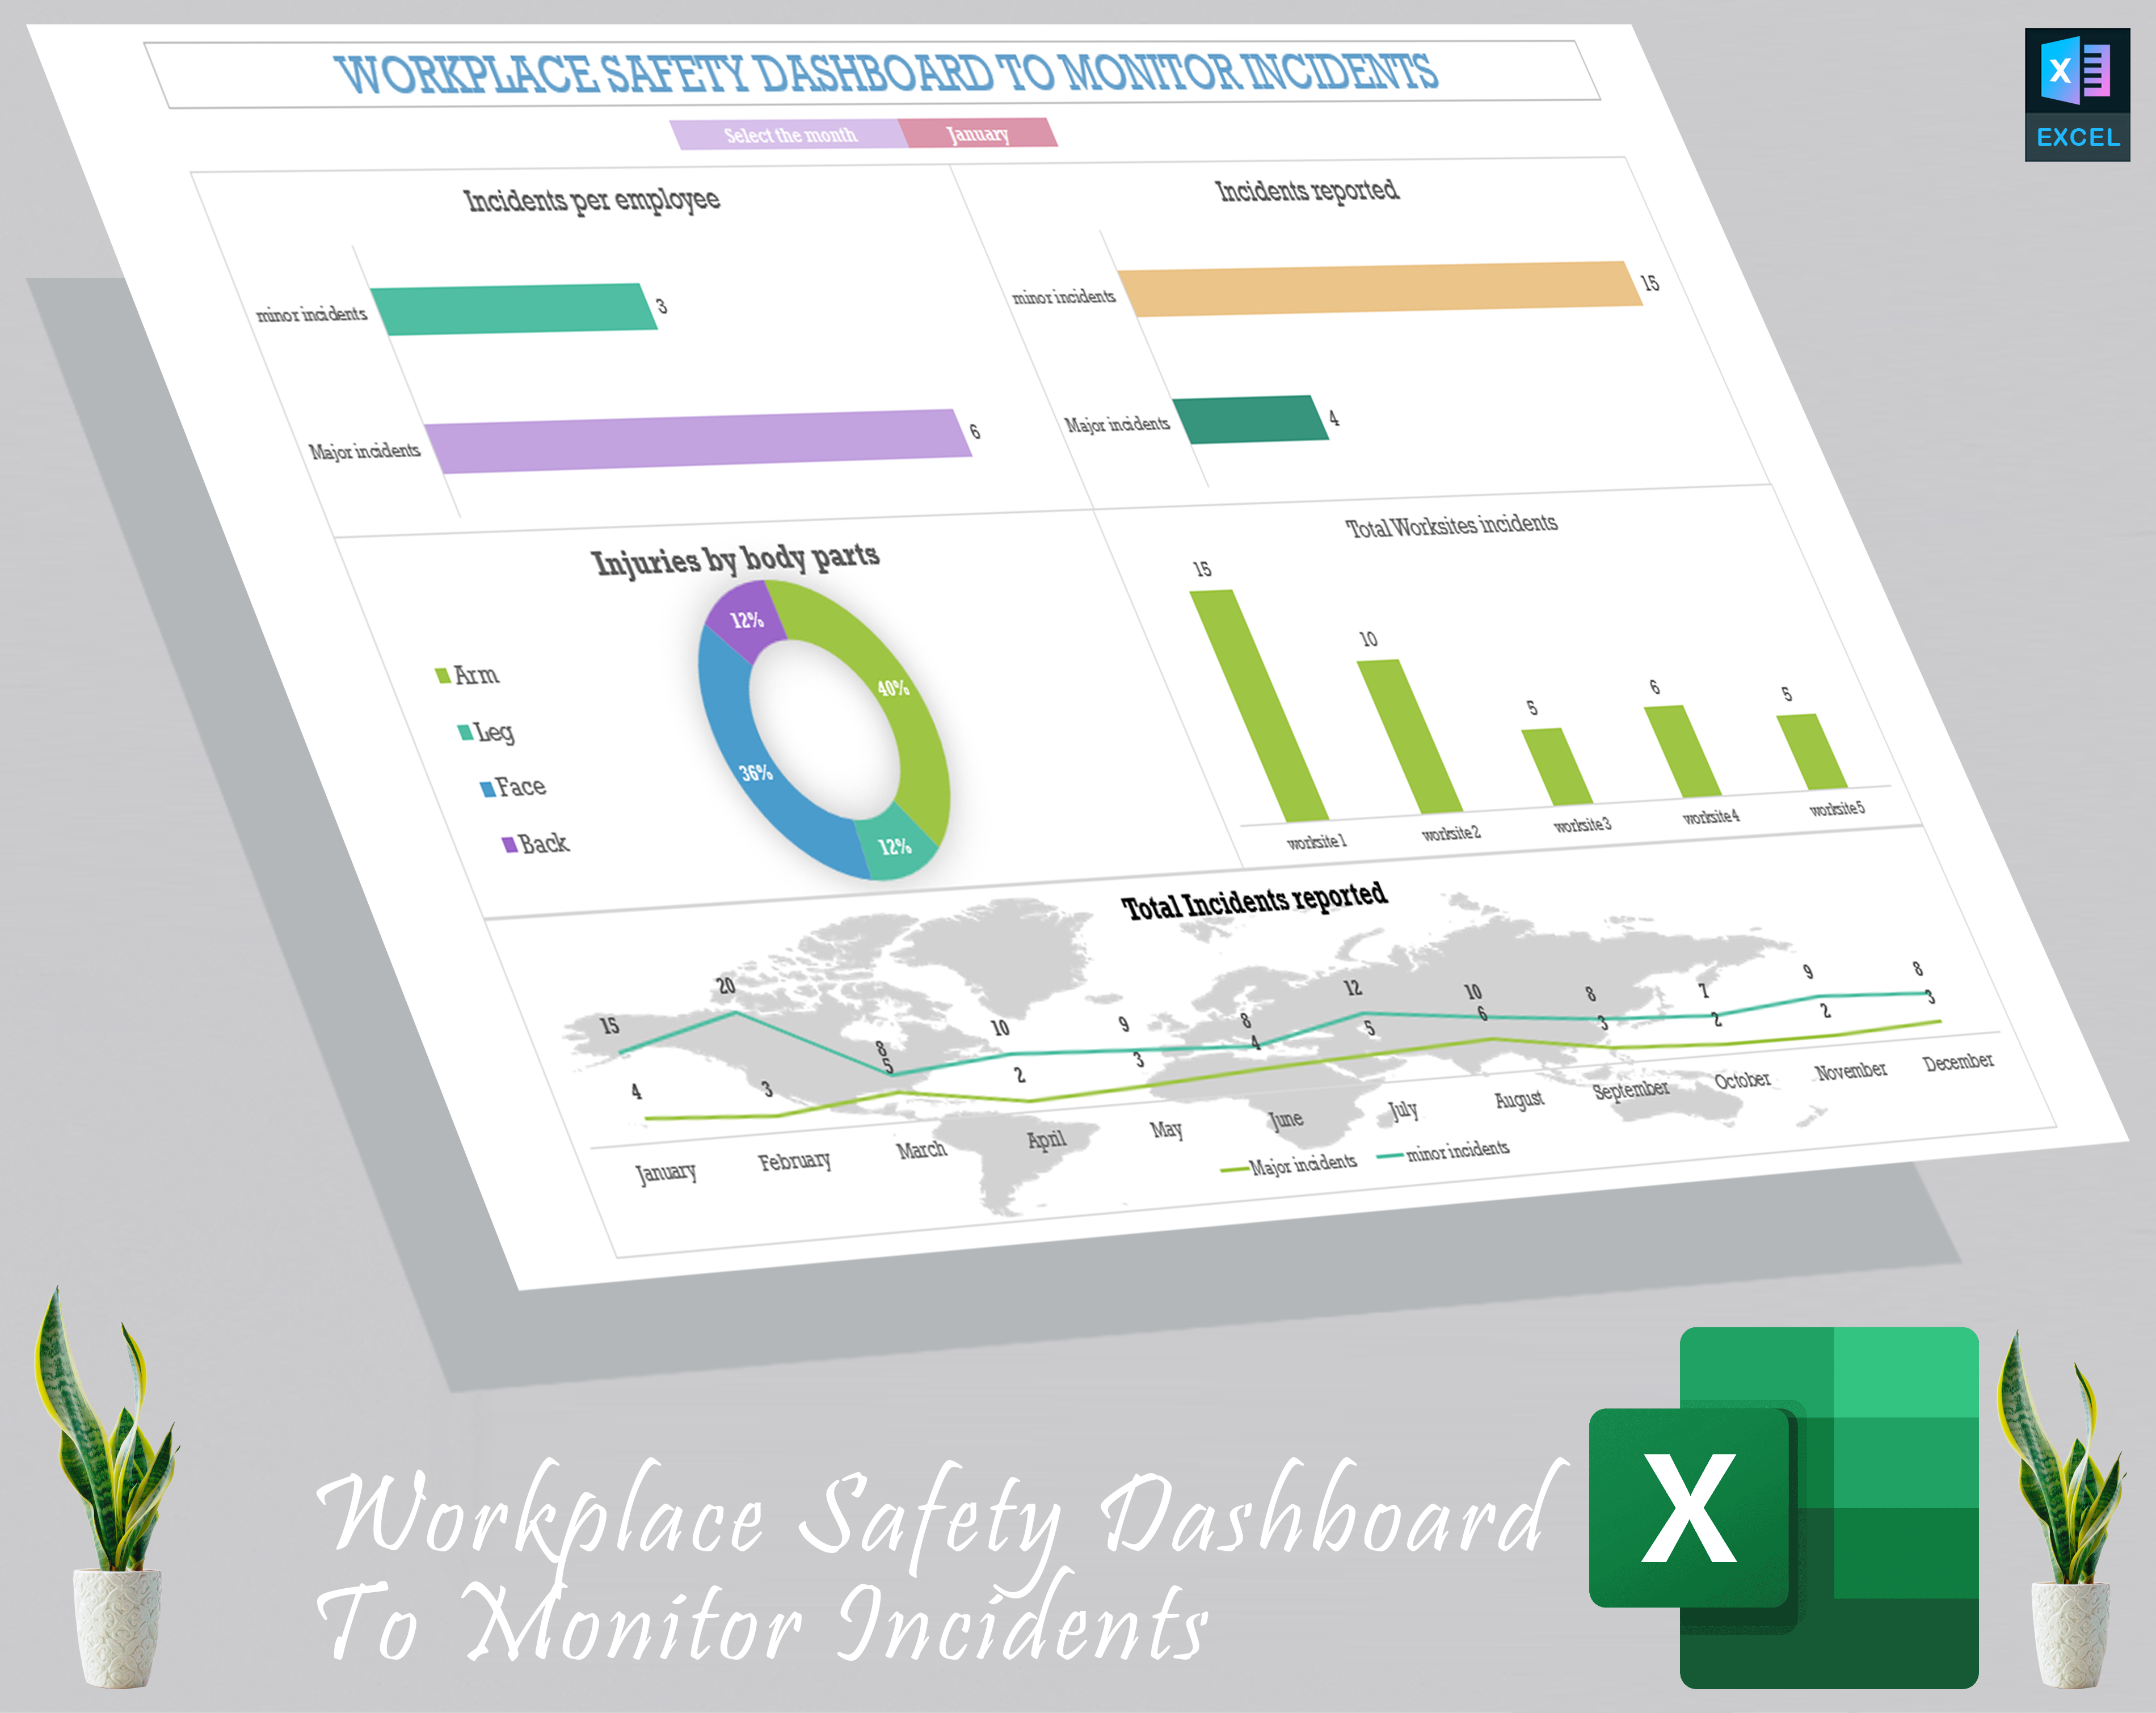 WORKPLACE SAFETY DASHBOARD TO MONITOR INCIDENTS